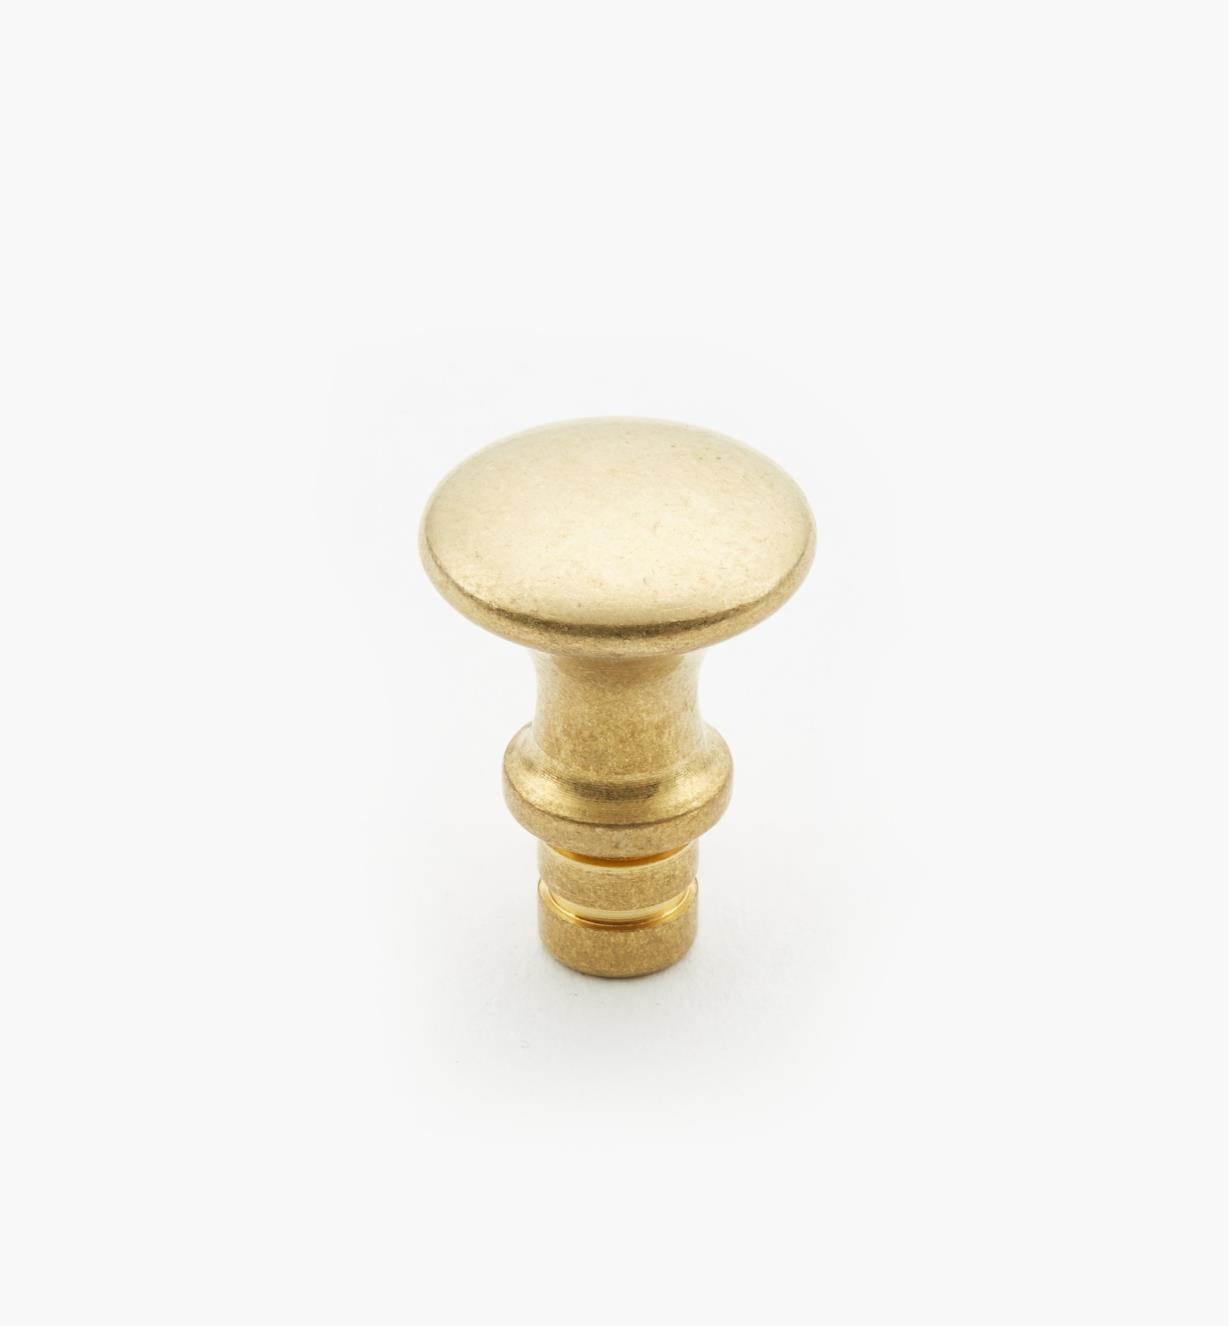 05H2203 - 7/16" x 7/16" Lee Valley Small Turned Brass Knob (5/8")